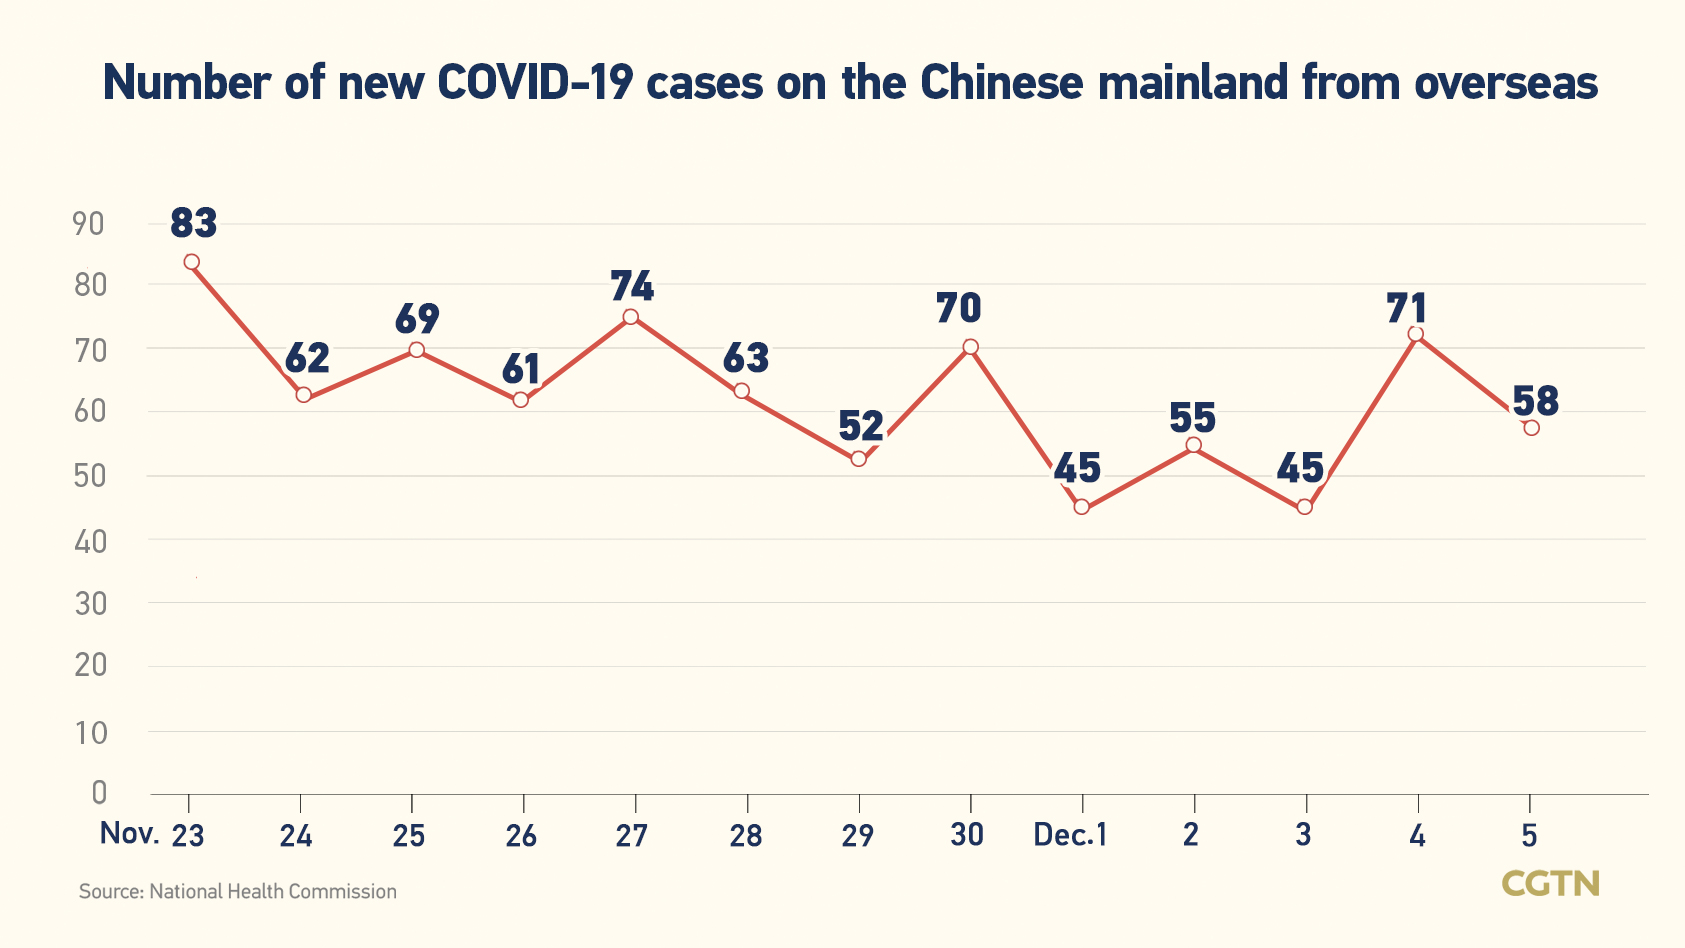 Chinese mainland records 5,046 new confirmed COVID-19 cases